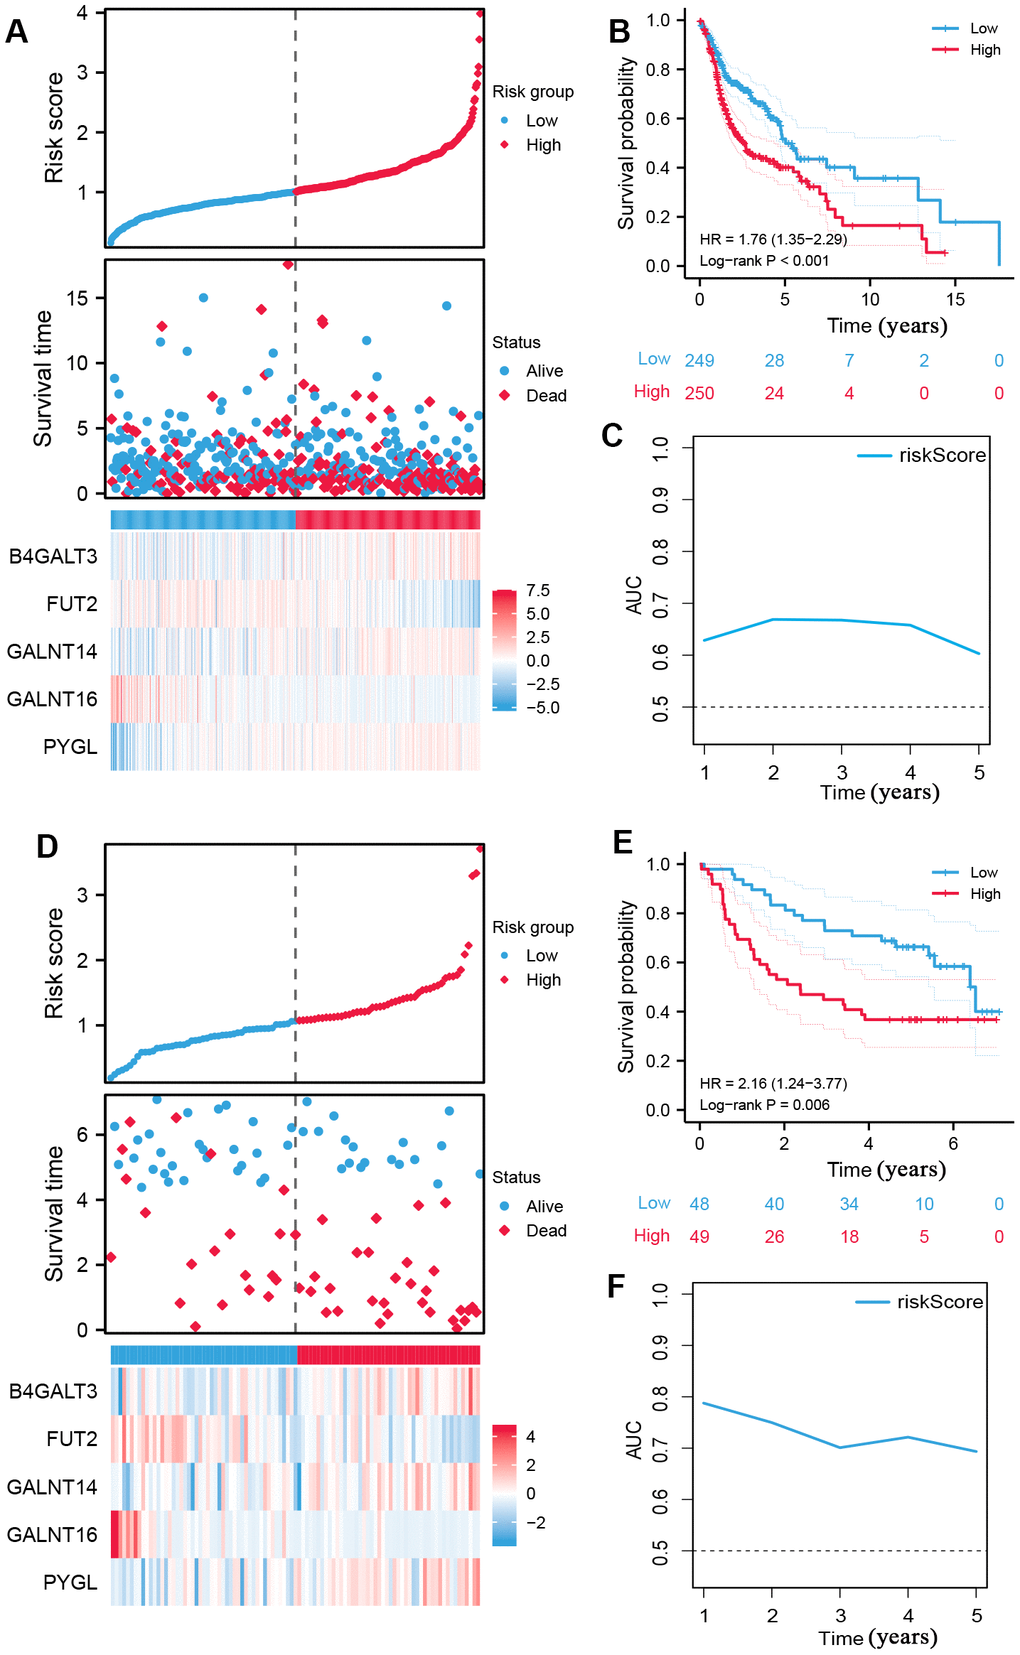 Construction of prognostic signature of five glycosyltransferase-related genes. (A–C) The prognostic signature was constructed in the TCGA dataset. (A) The distribution of risk score, OS status, and the heatmap of the expression profiles of signature genes, (B) K-M survival curves based on the prognostic signature, and (C) the AUCs of glycosyltransfer related gene signature. (D–F) Evaluate the performance of the prognostic signature in the GSE41613 dataset. (D) The distribution of risk score, OS status, and the heatmap of the expression profiles of signature genes, (E) K-M survival curves based on the prognostic signature, and (F) the AUCs of glycosyltransfer related gene signature.